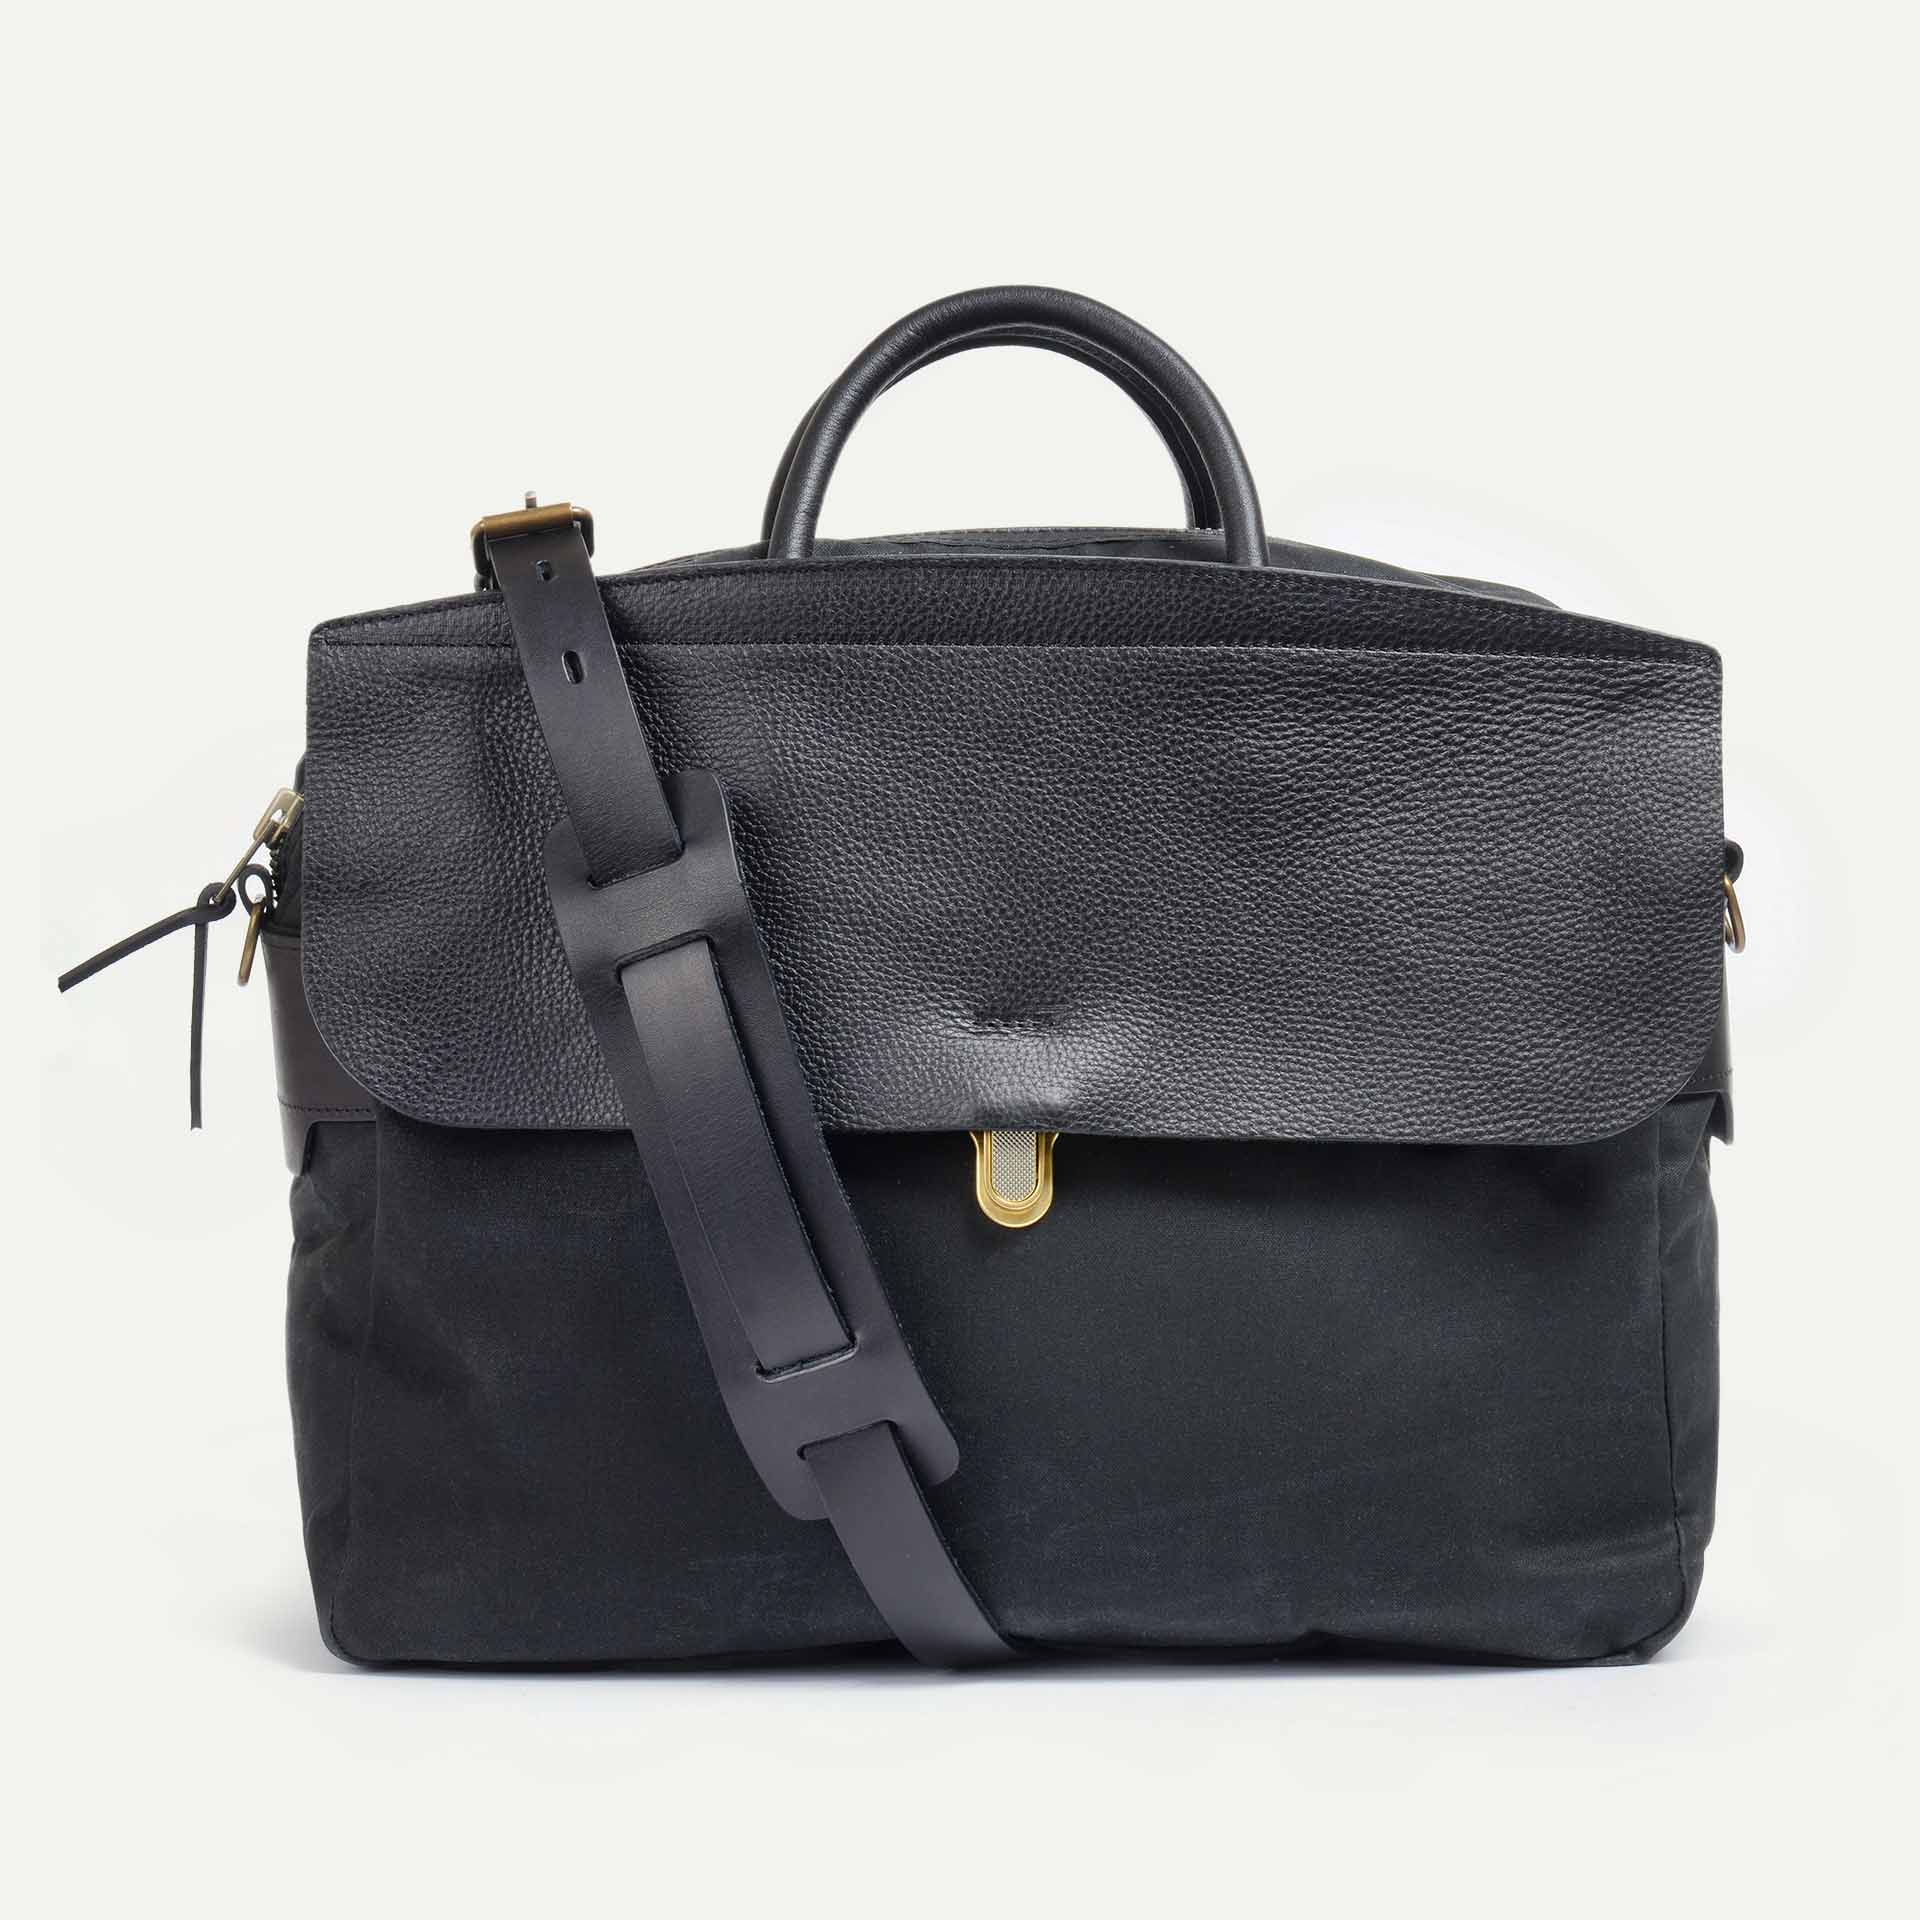 Zeppo business bag in canvas and leather